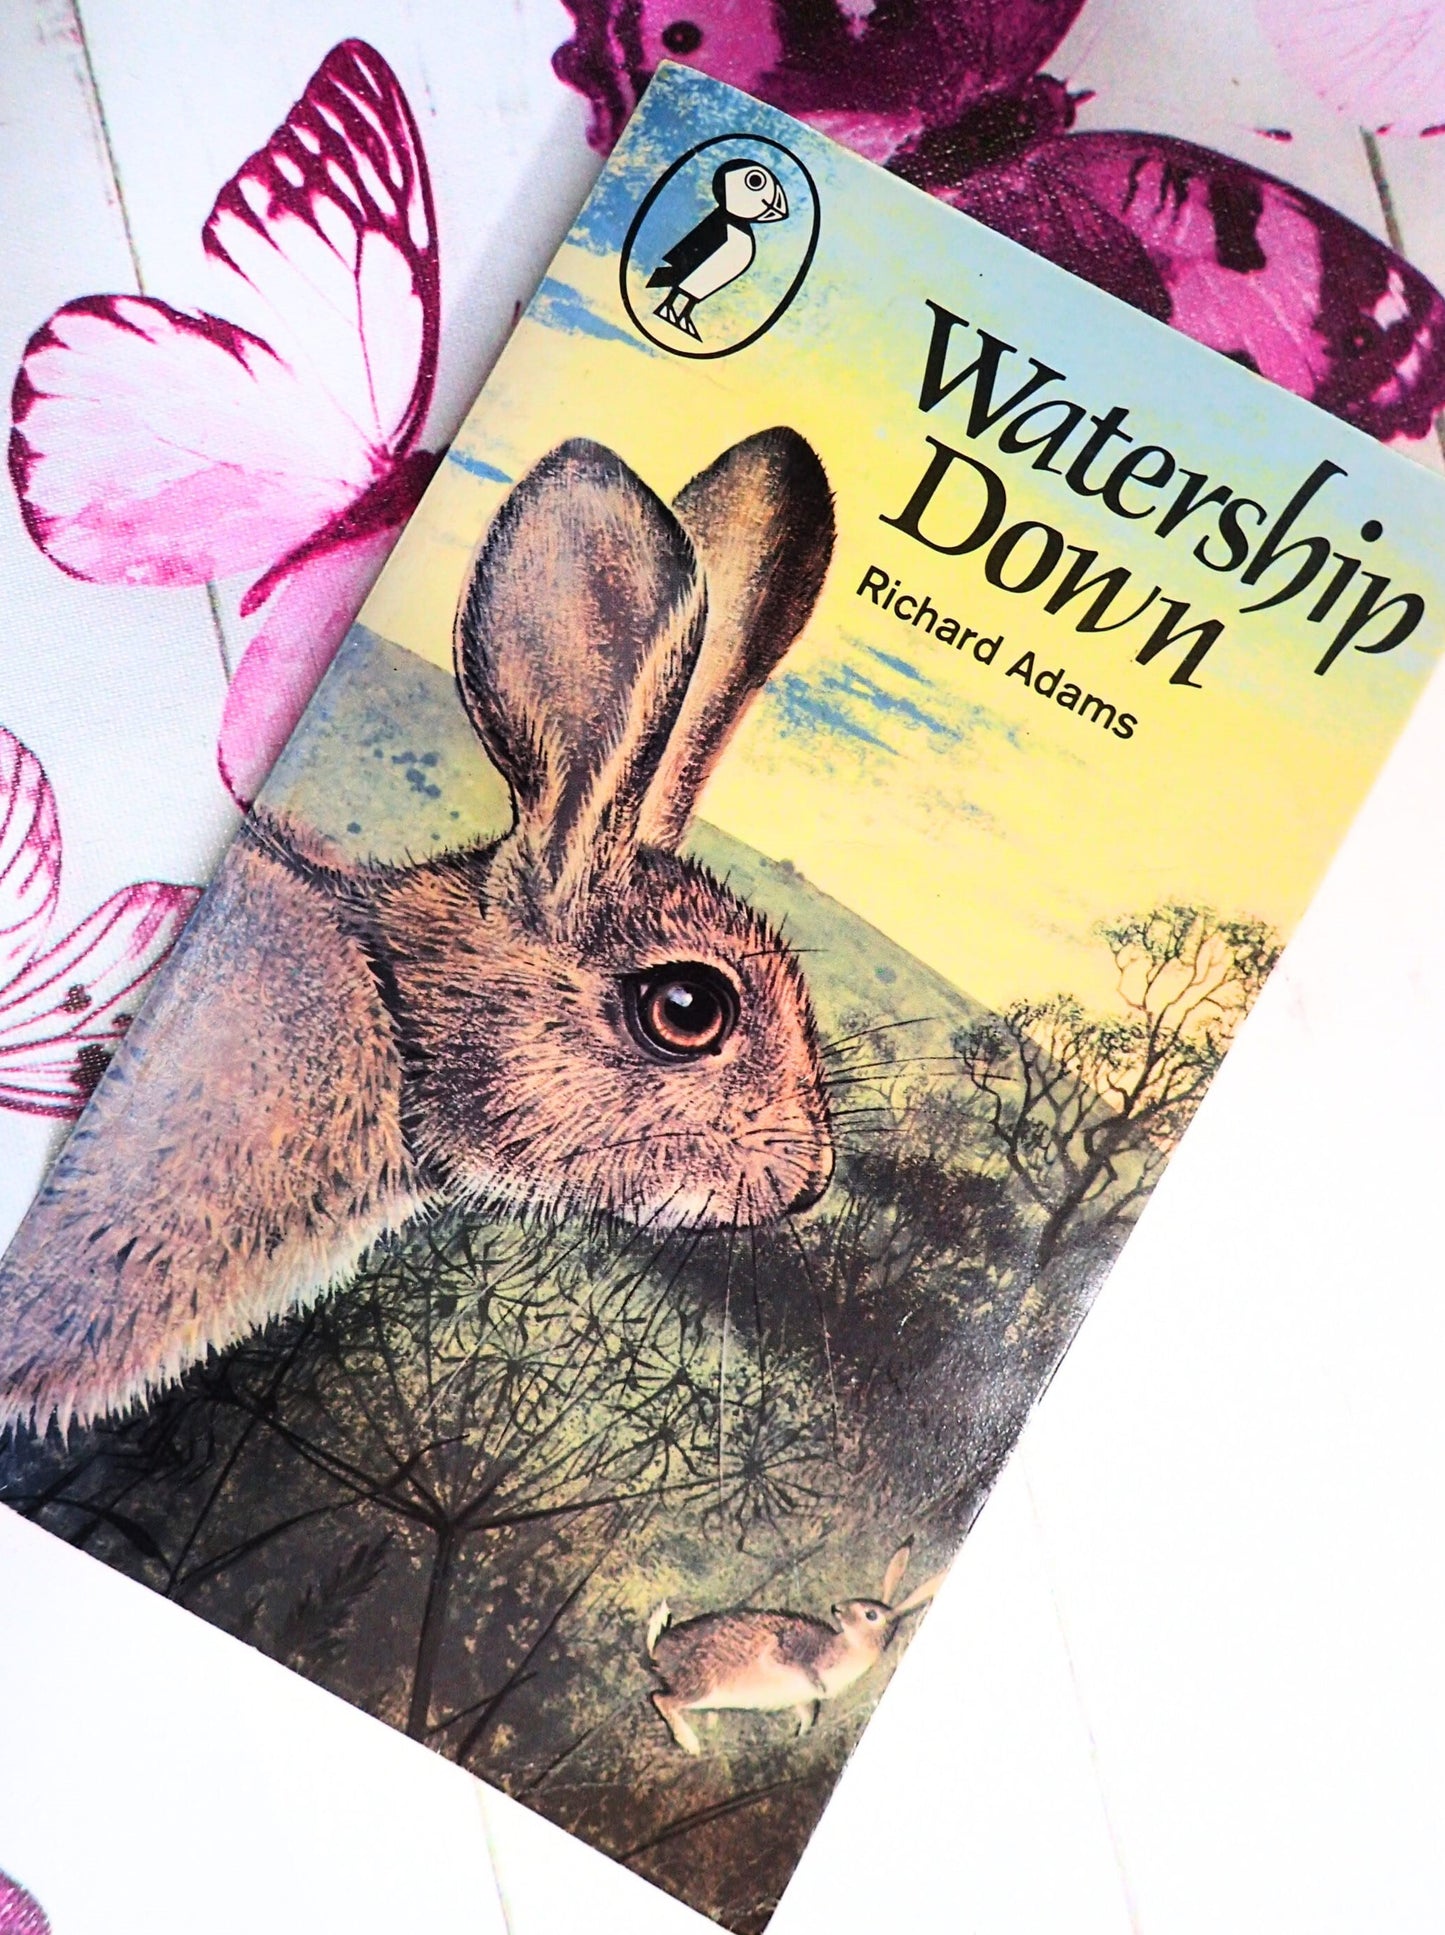 Front Cover of Watership Down by Richard Adams 1970's Pauline Baynes Illustration